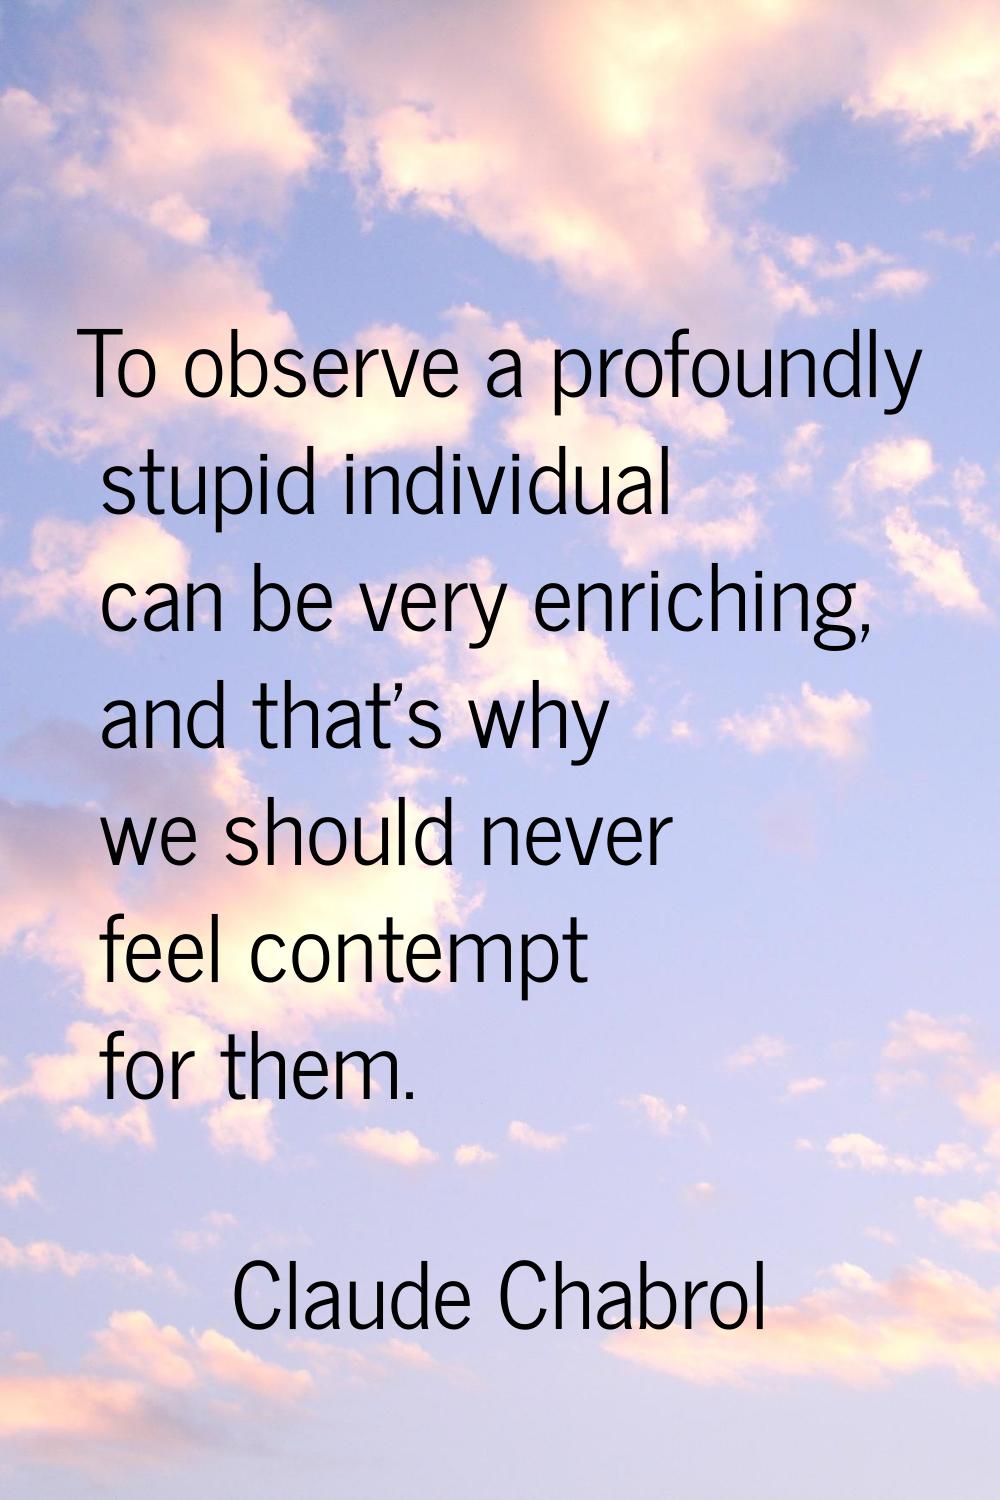 To observe a profoundly stupid individual can be very enriching, and that's why we should never fee